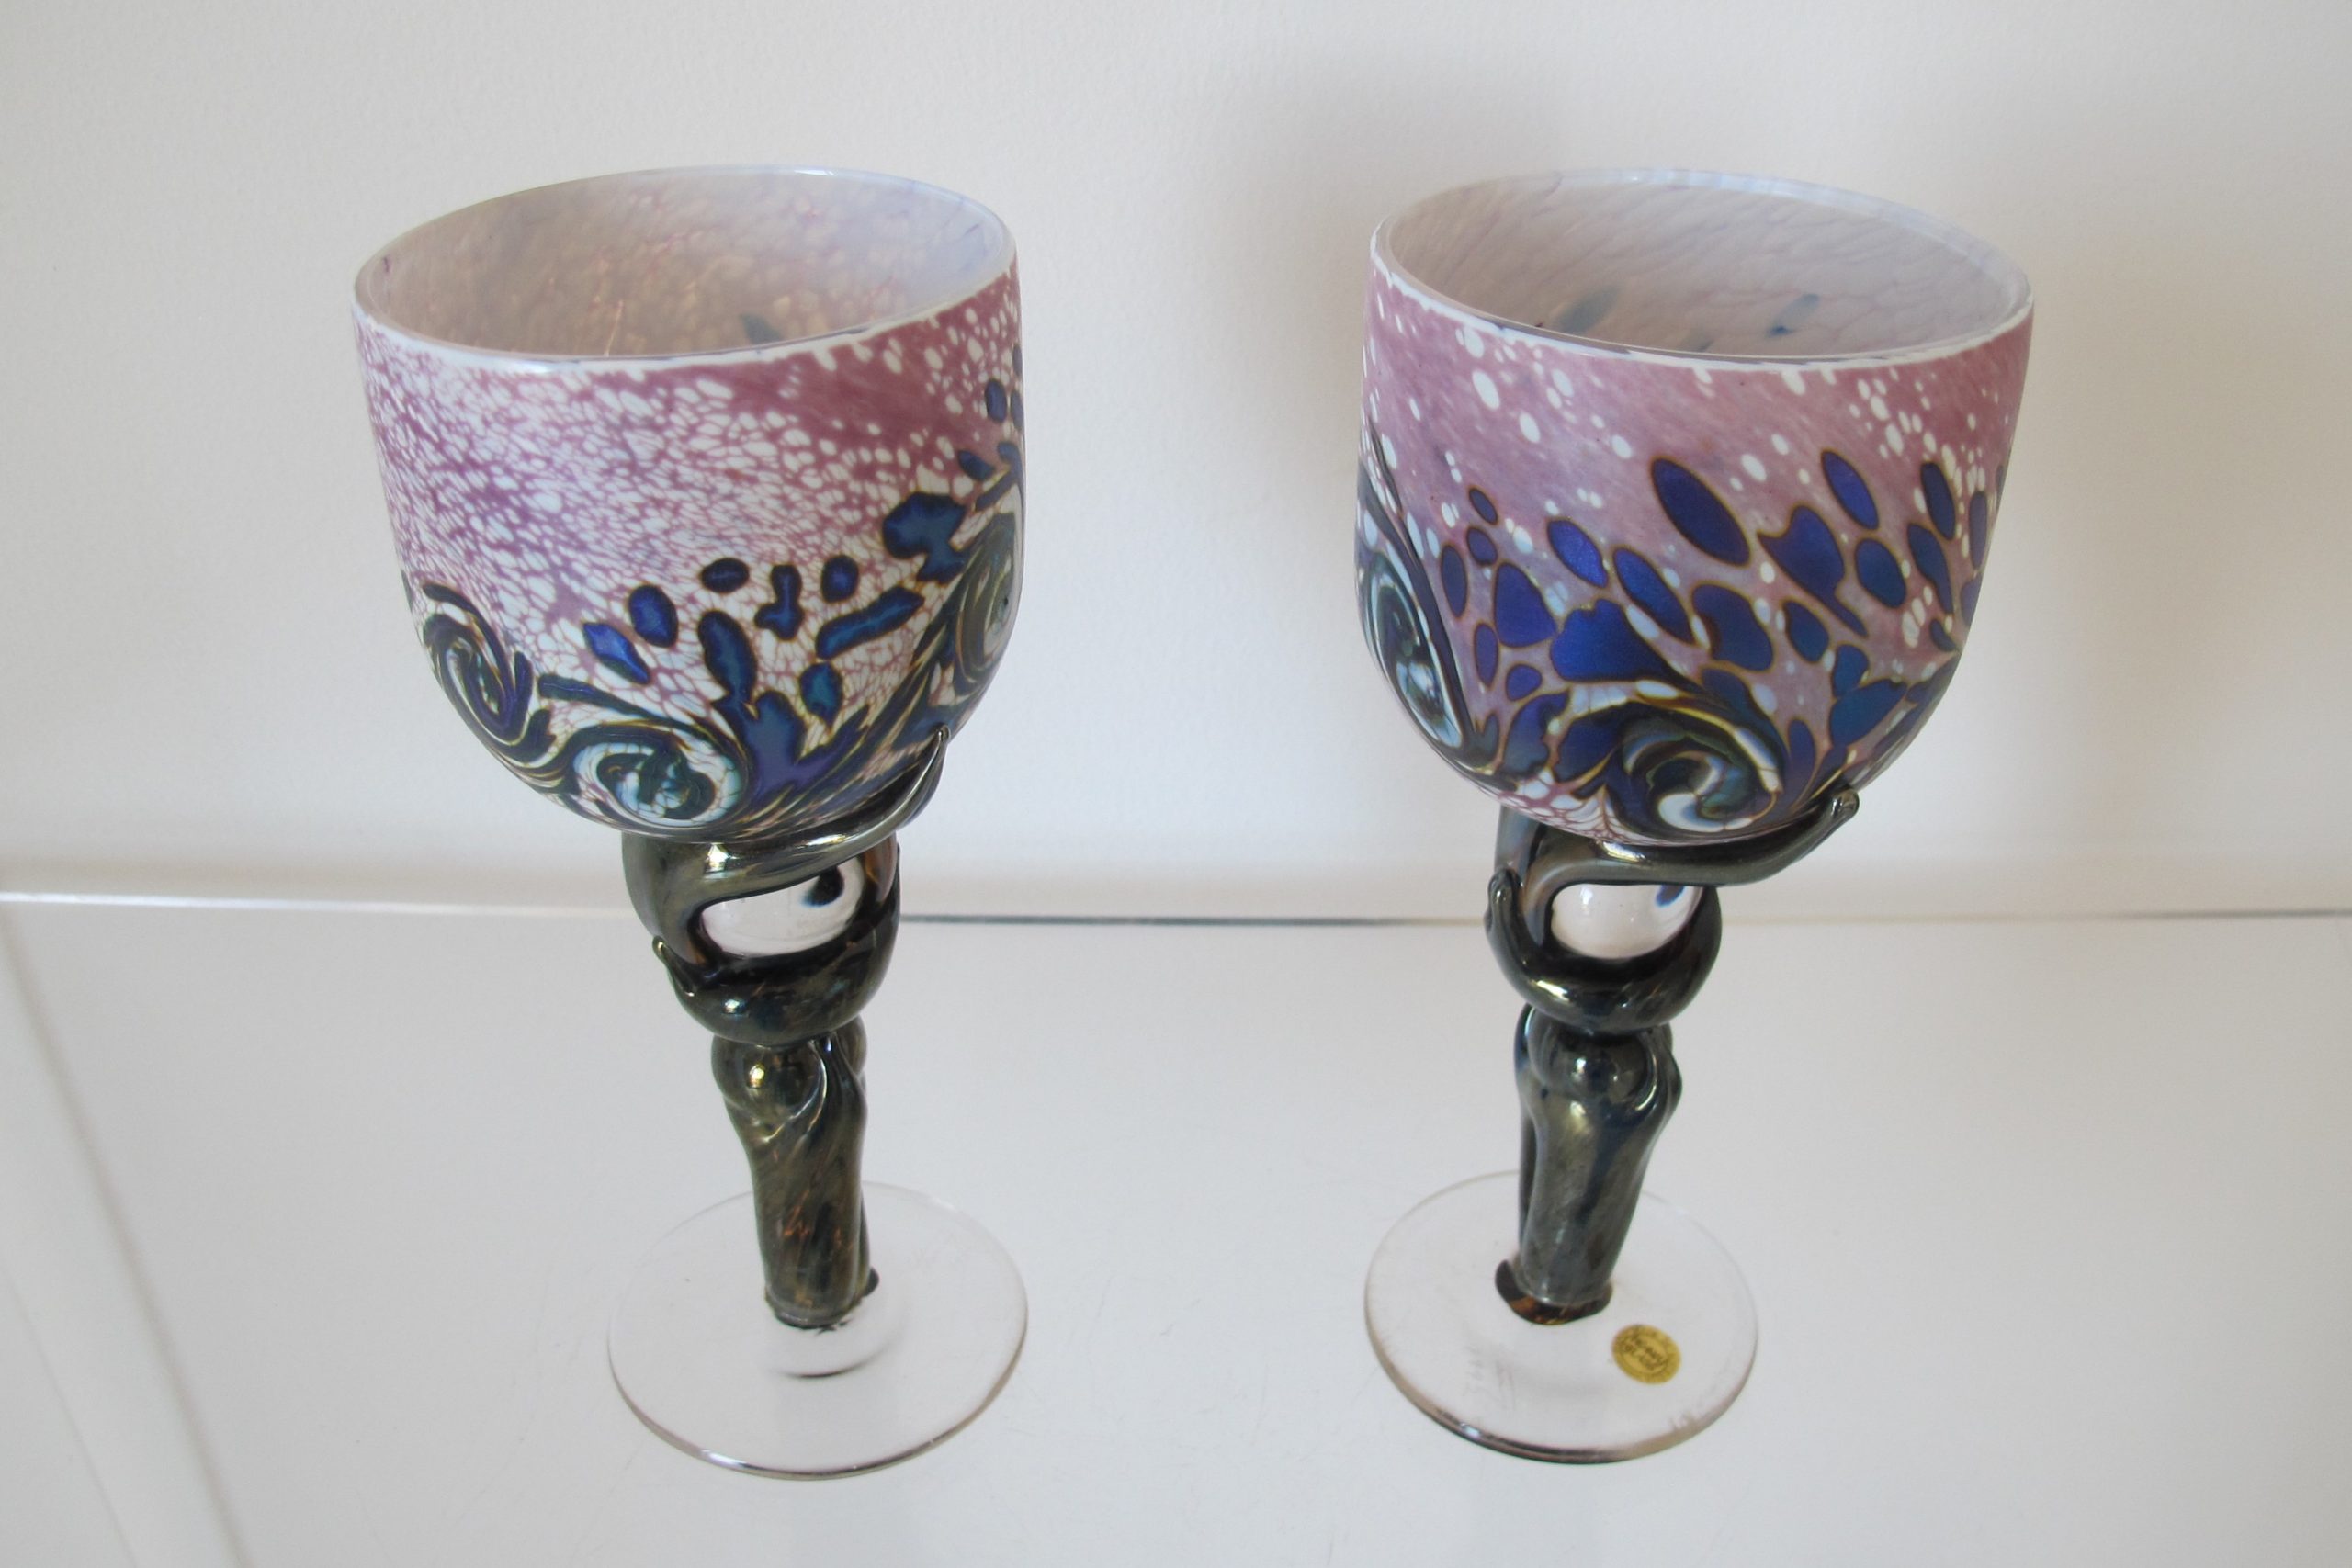 At Auction: UNUSUAL AND RARE COLIN HEANEY GOBLET WITH AMBER STEM, PINK  BOWL, HEART SHAPED INCLUSION, 2000 SIGNATURE TO FOOT